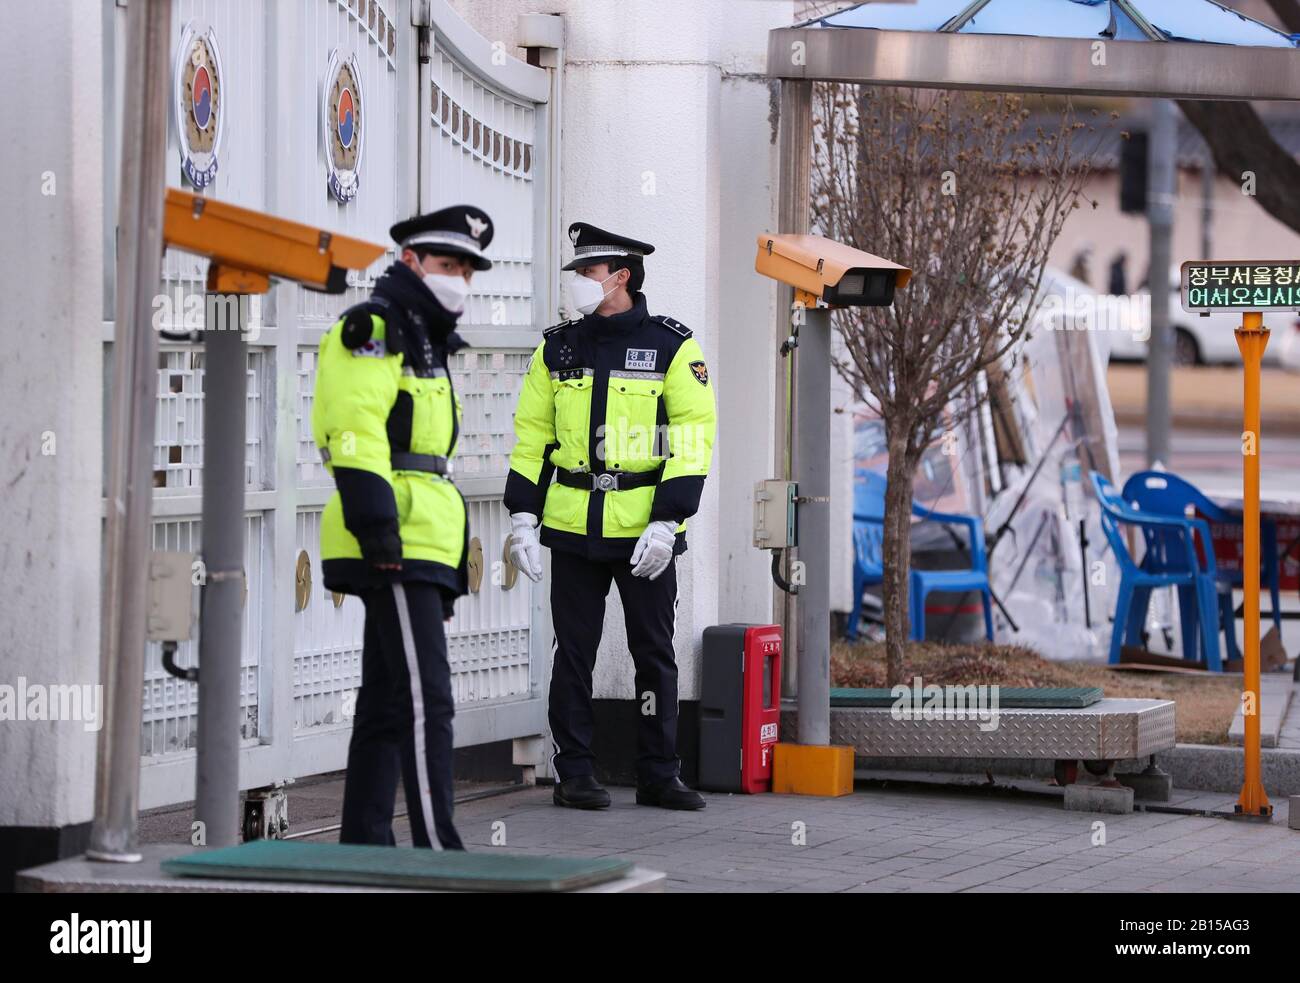 Seoul, South Korea. 23rd Feb, 2020. Policemen are on duty outside the government complex in Seoul, South Korea, Feb. 23, 2020. South Korea raised its four-tier virus alert to the highest 'red' level on Sunday as the number of COVID-19 infection cases soared to 602 in recent days with the death toll rising to five. Credit: Wang Jingqiang/Xinhua/Alamy Live News Stock Photo